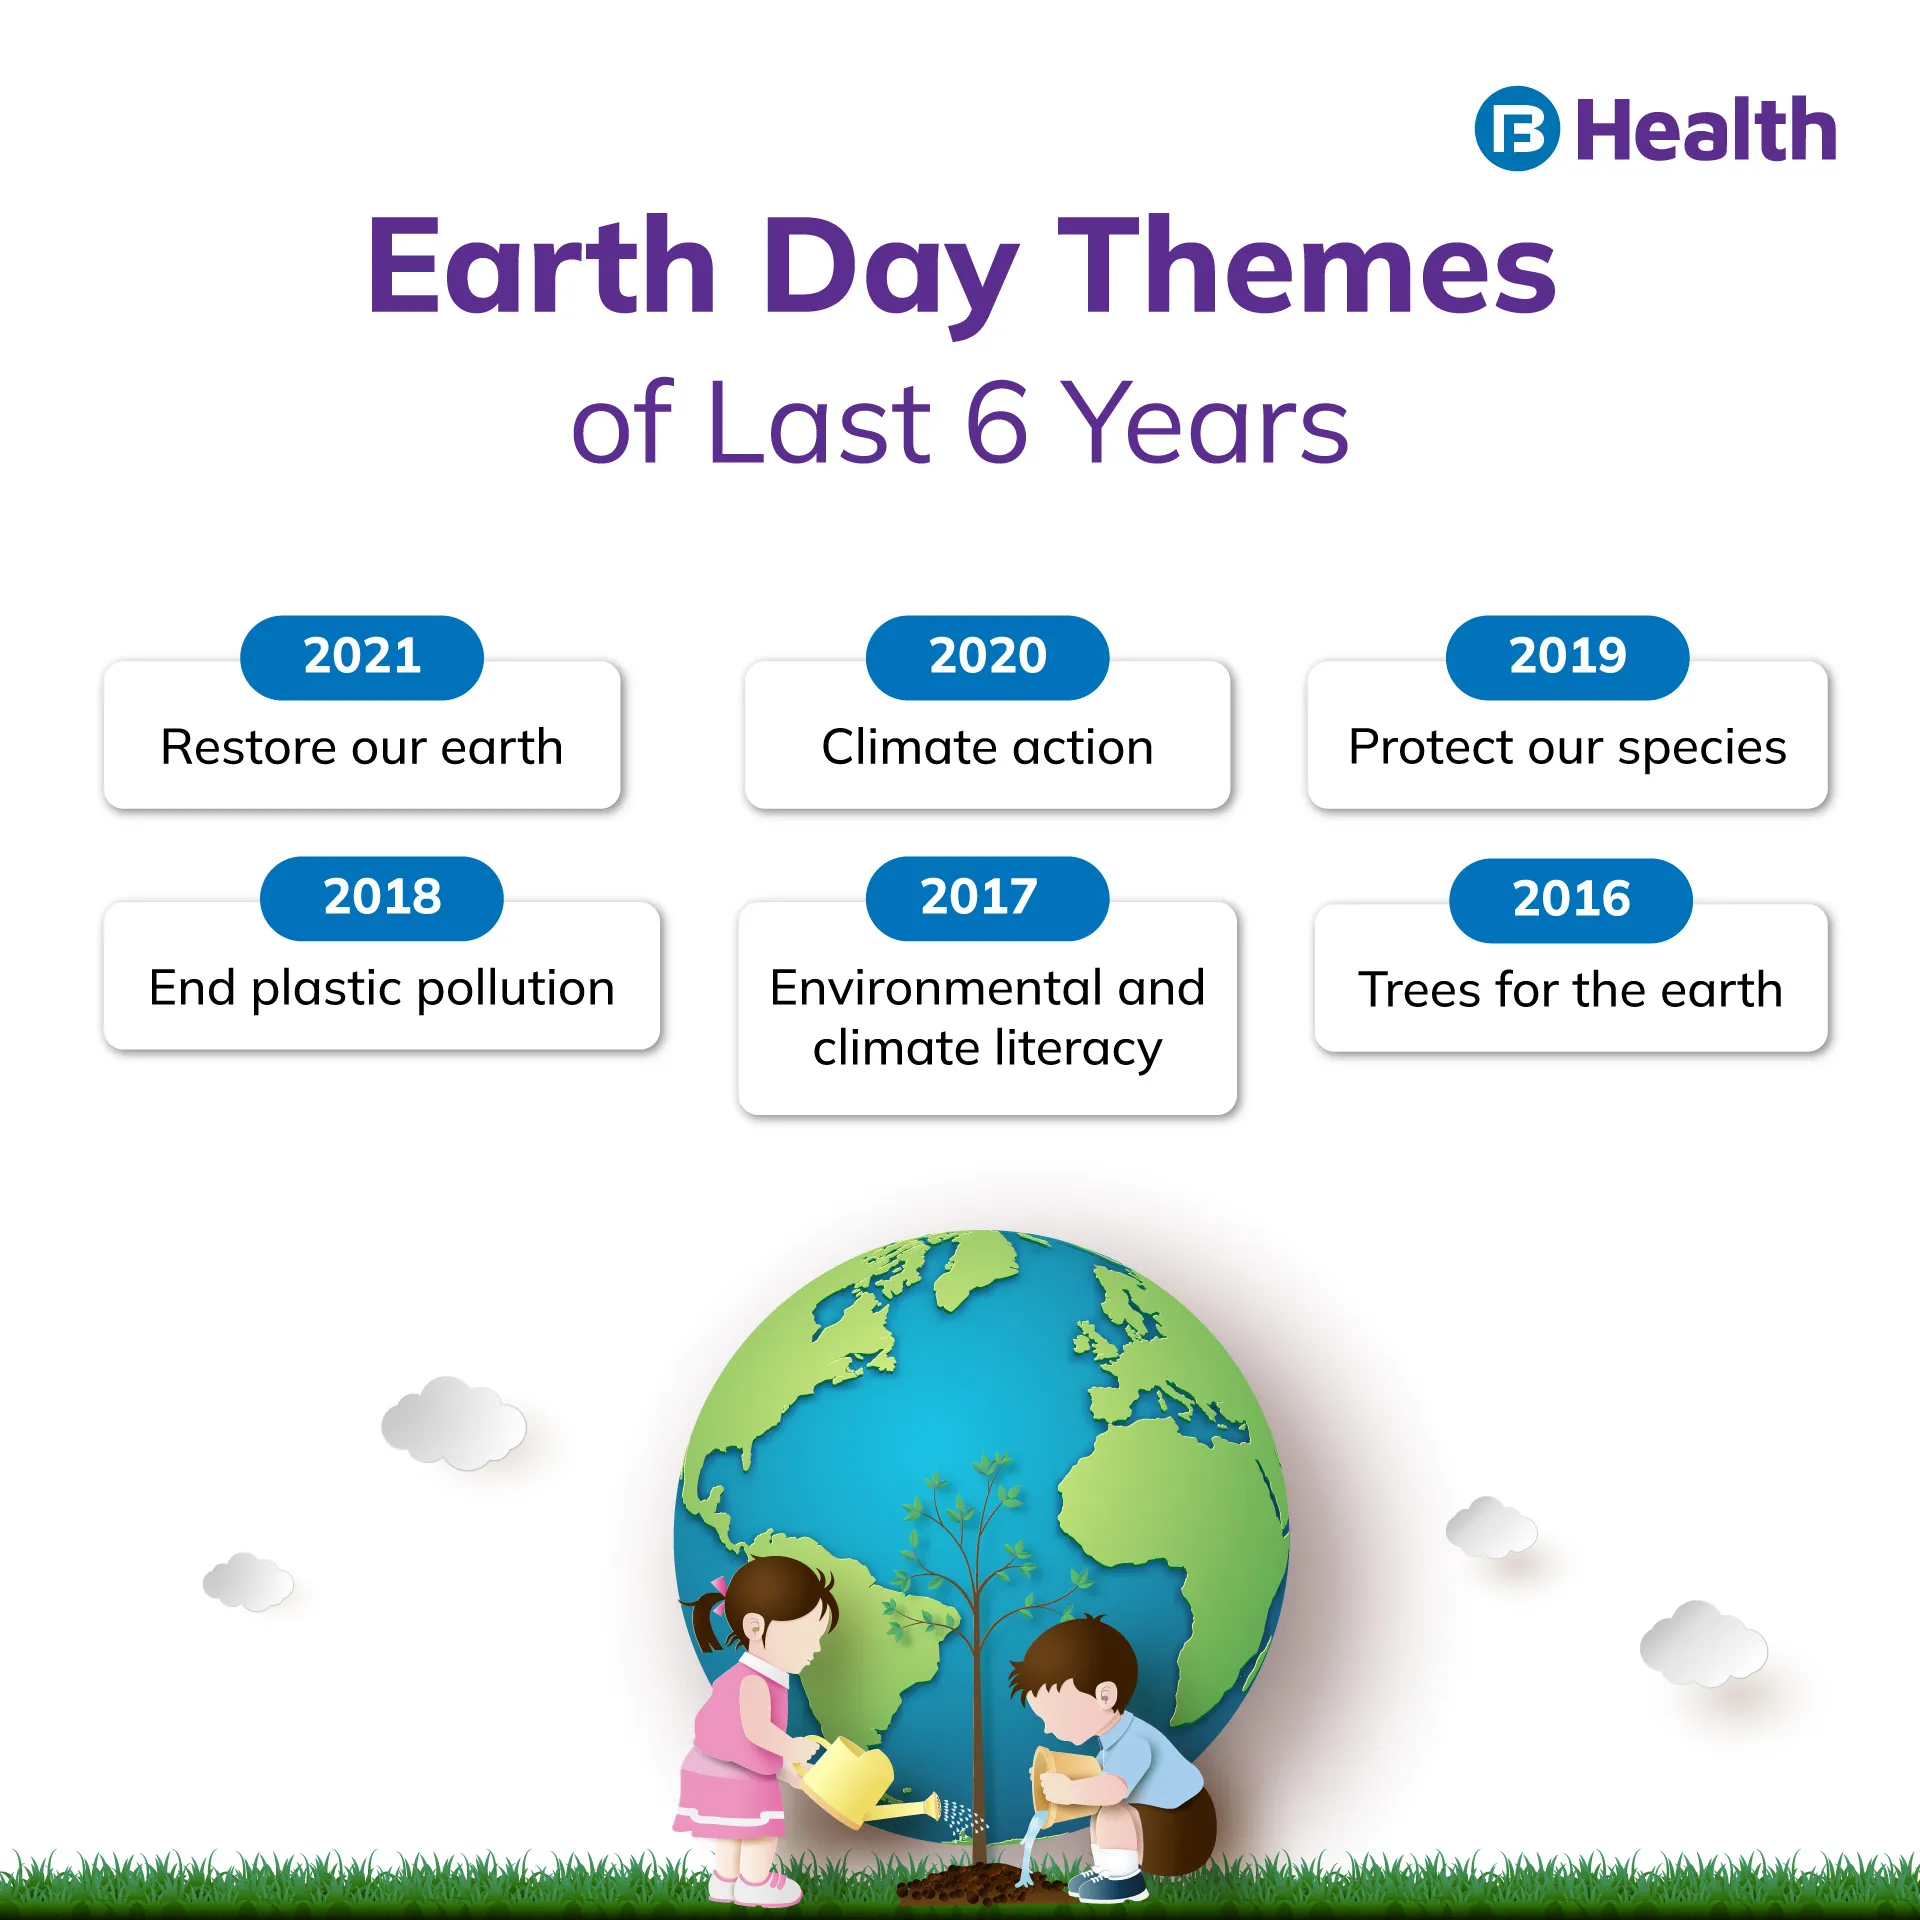 Earth Day themes